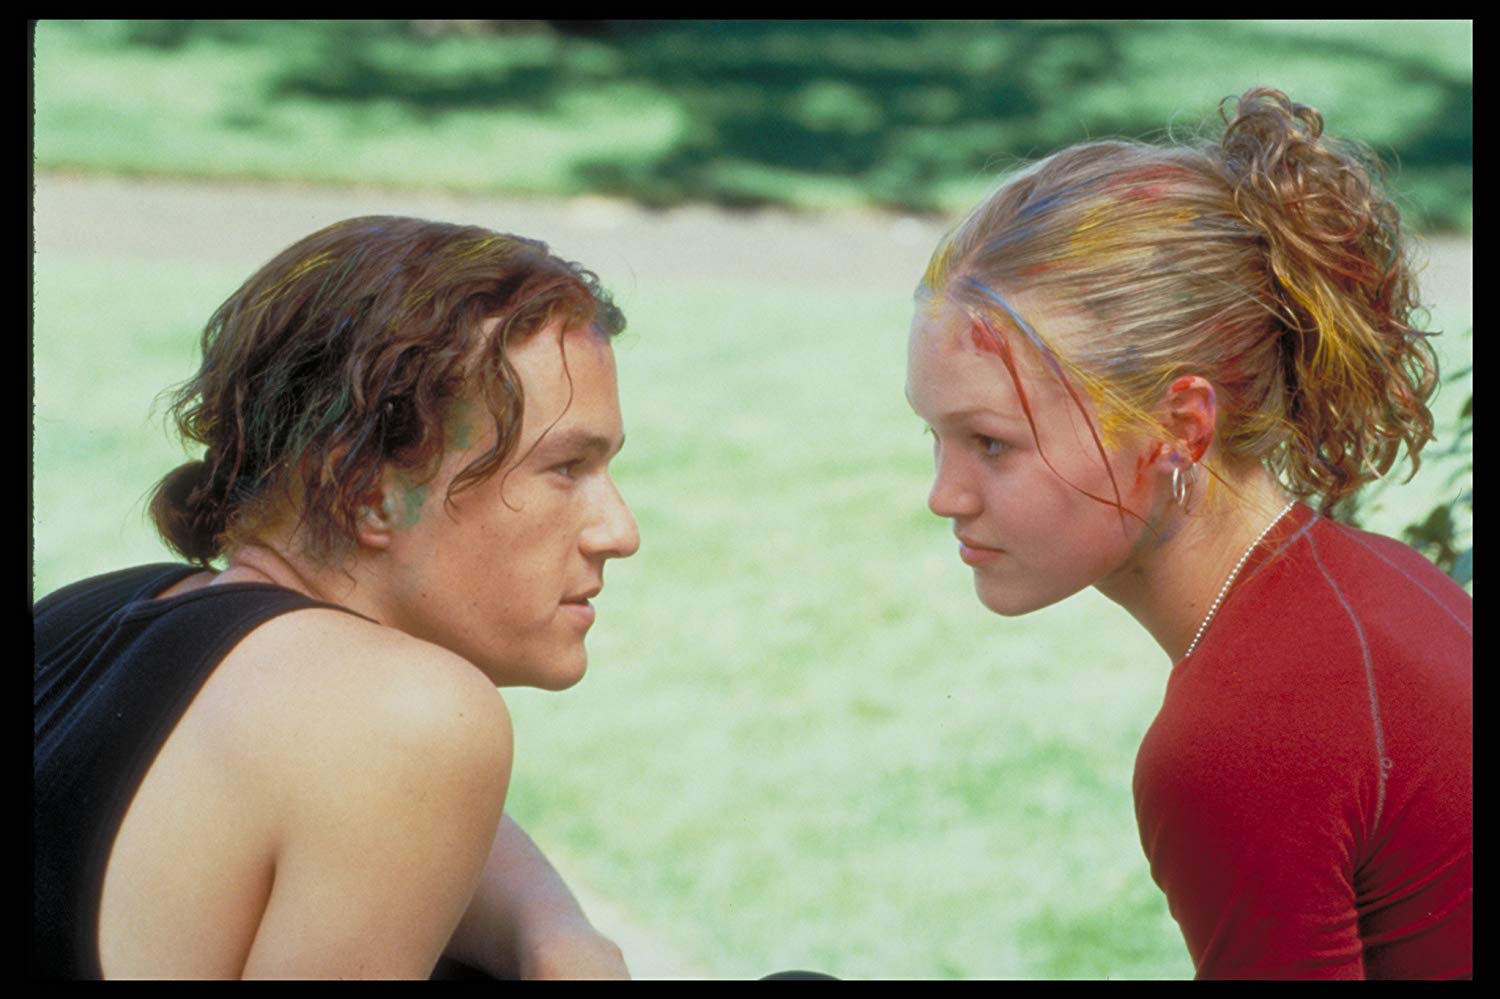 movie review on 10 things i hate about you